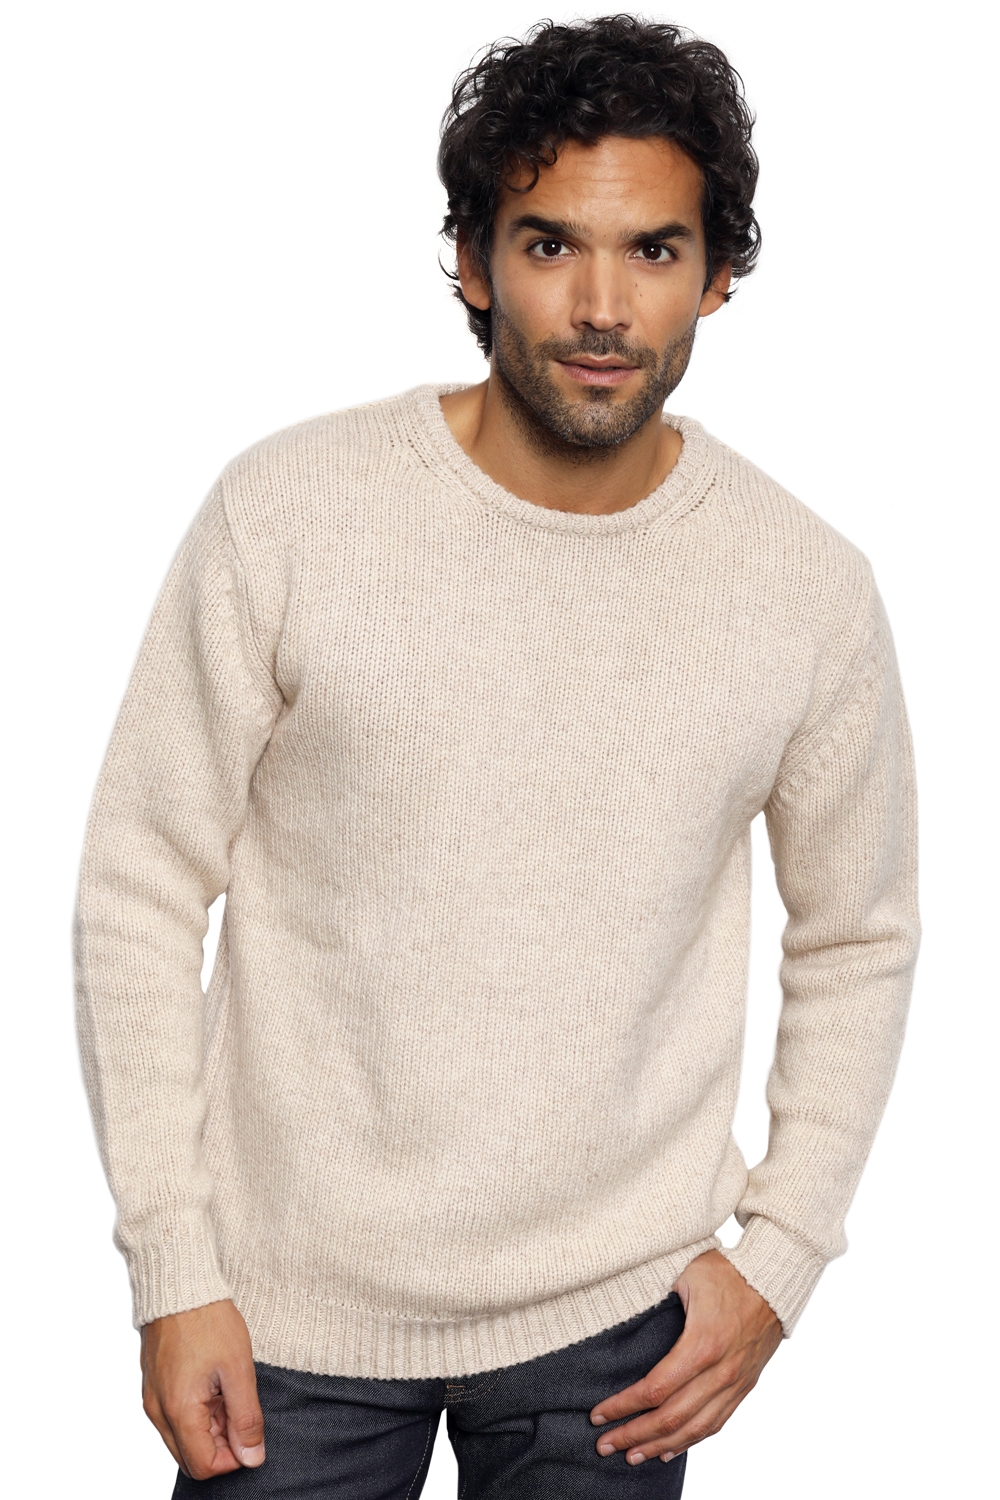 Chameau pull homme cole nature 2xl